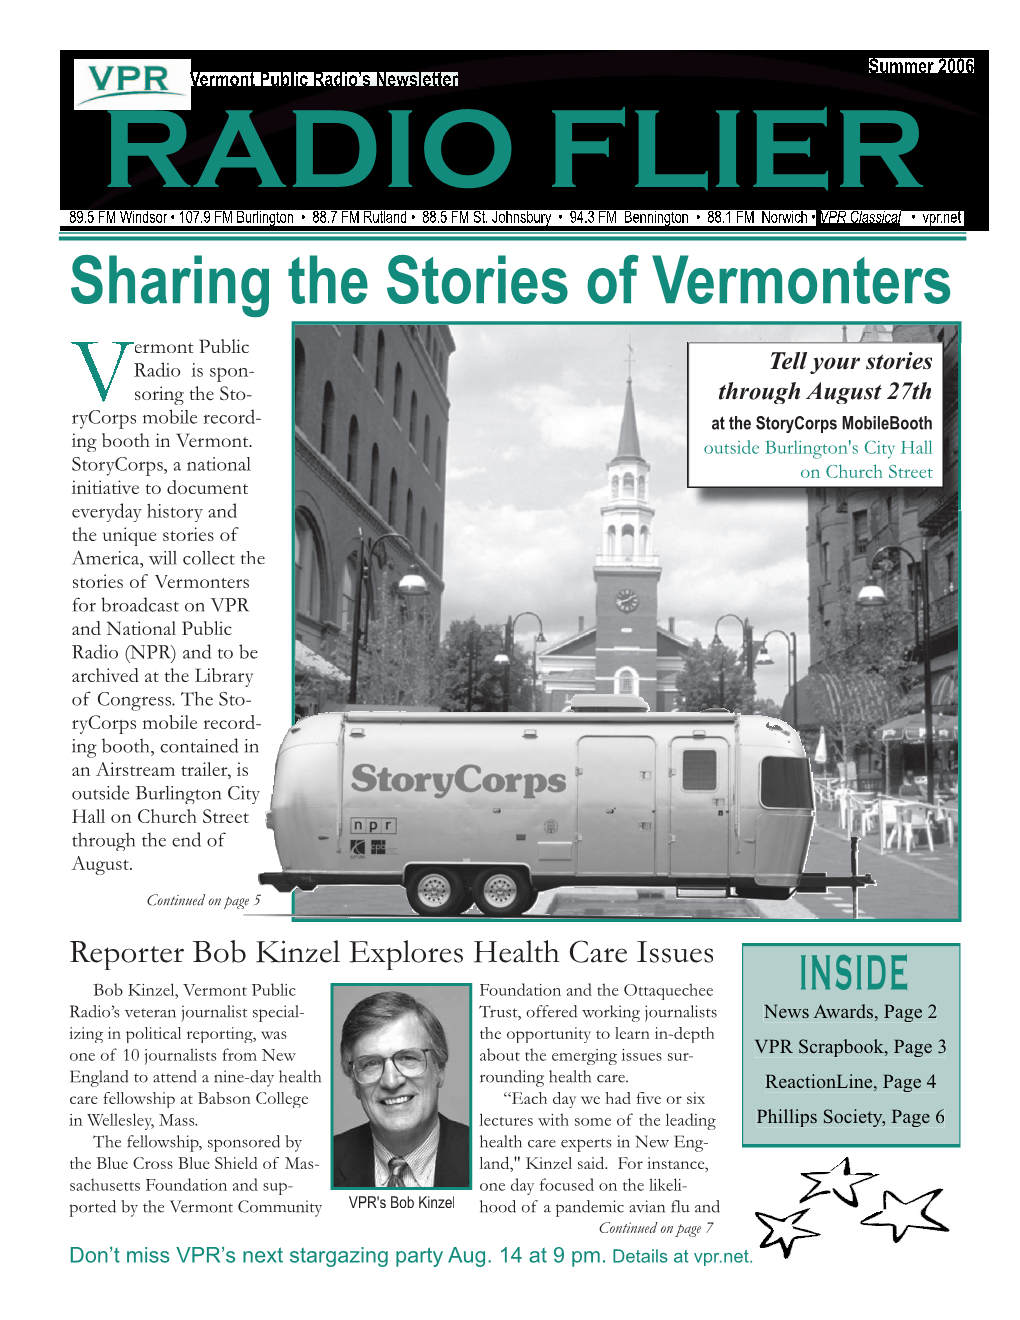 Sharing the Stories of Vermonters